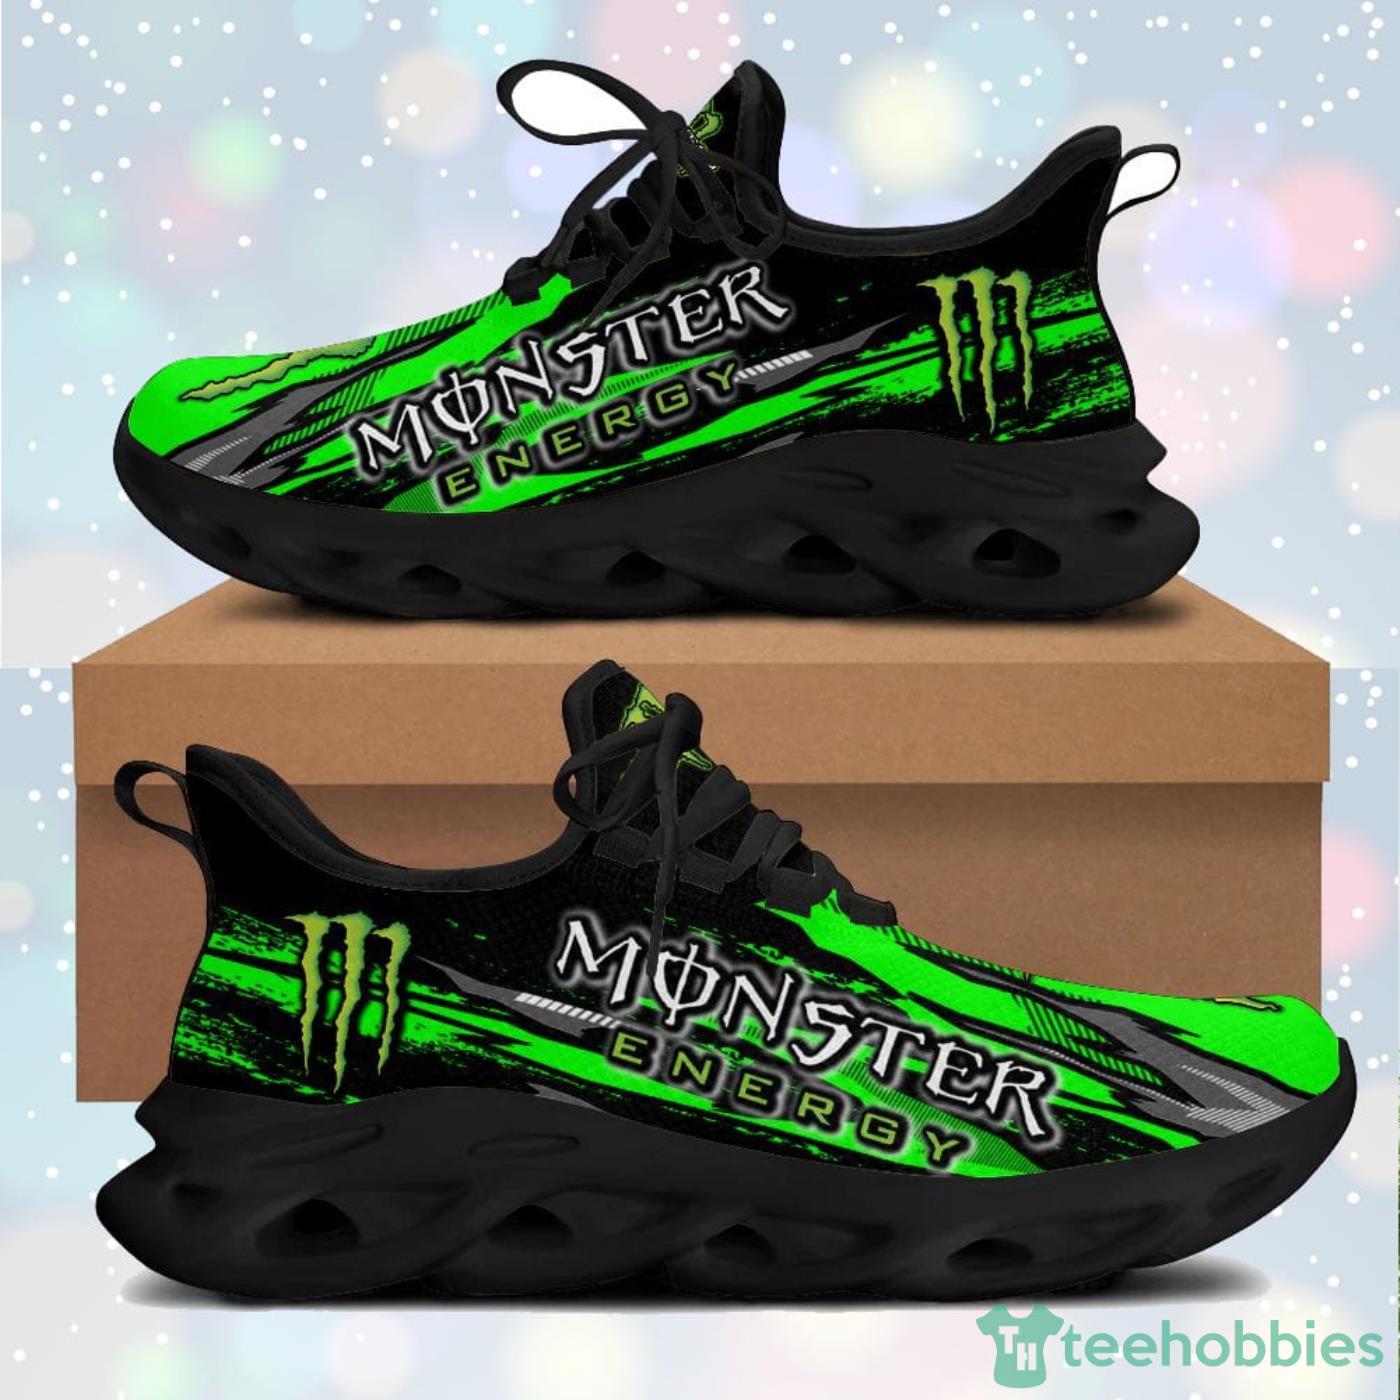 Top 9 Models Of Sneaker Shoes Those Love Monster Energy